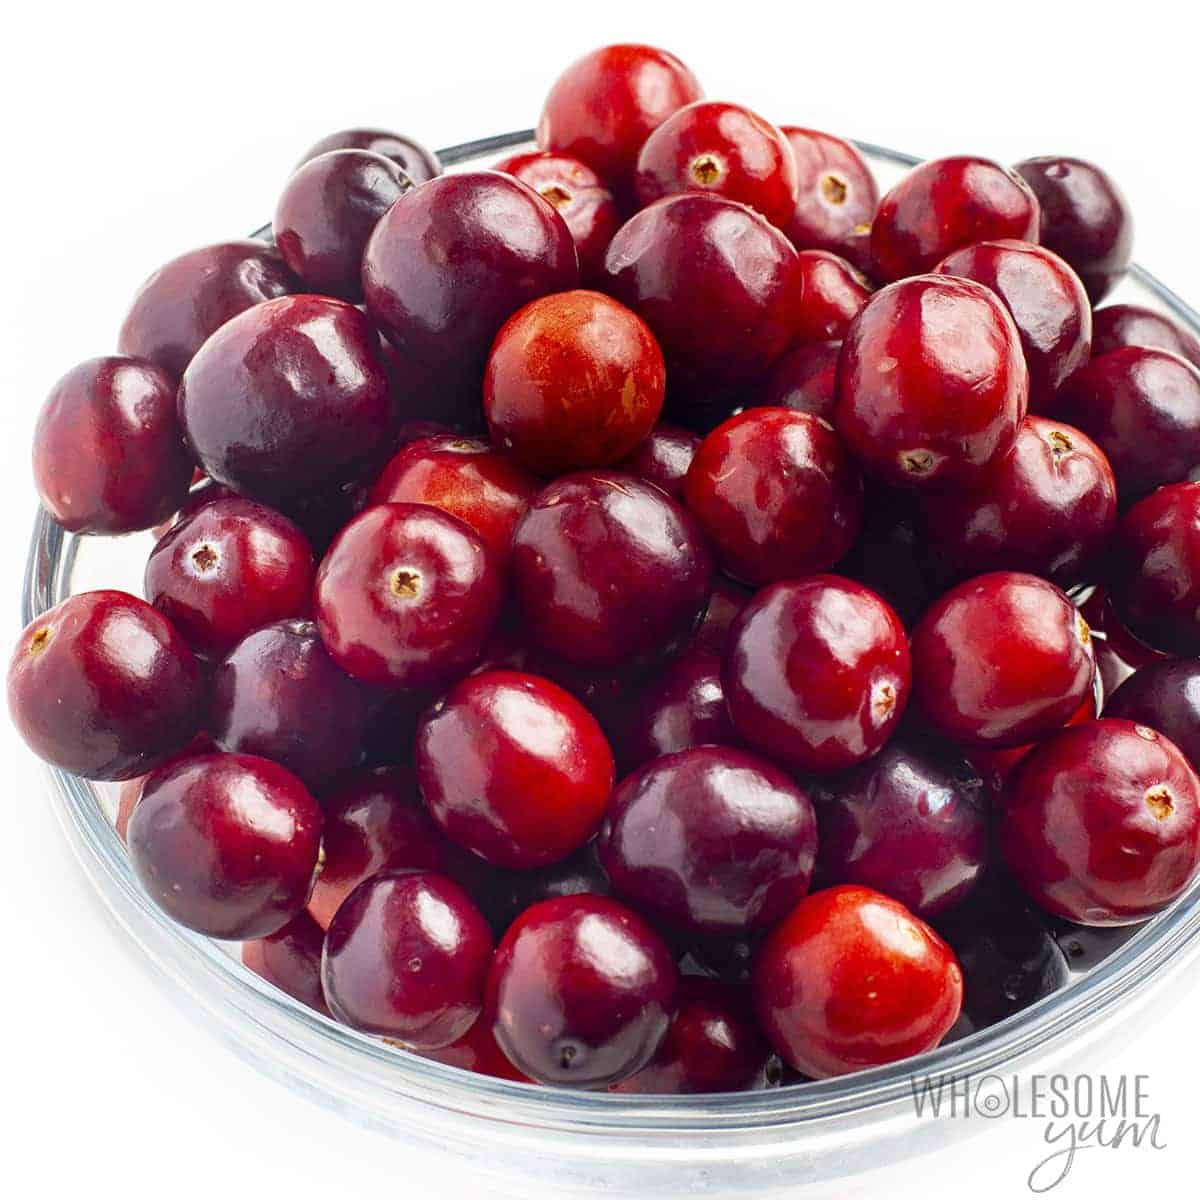 How low are carbs in cranberries? These fresh cranberries are keto and low in carbs.